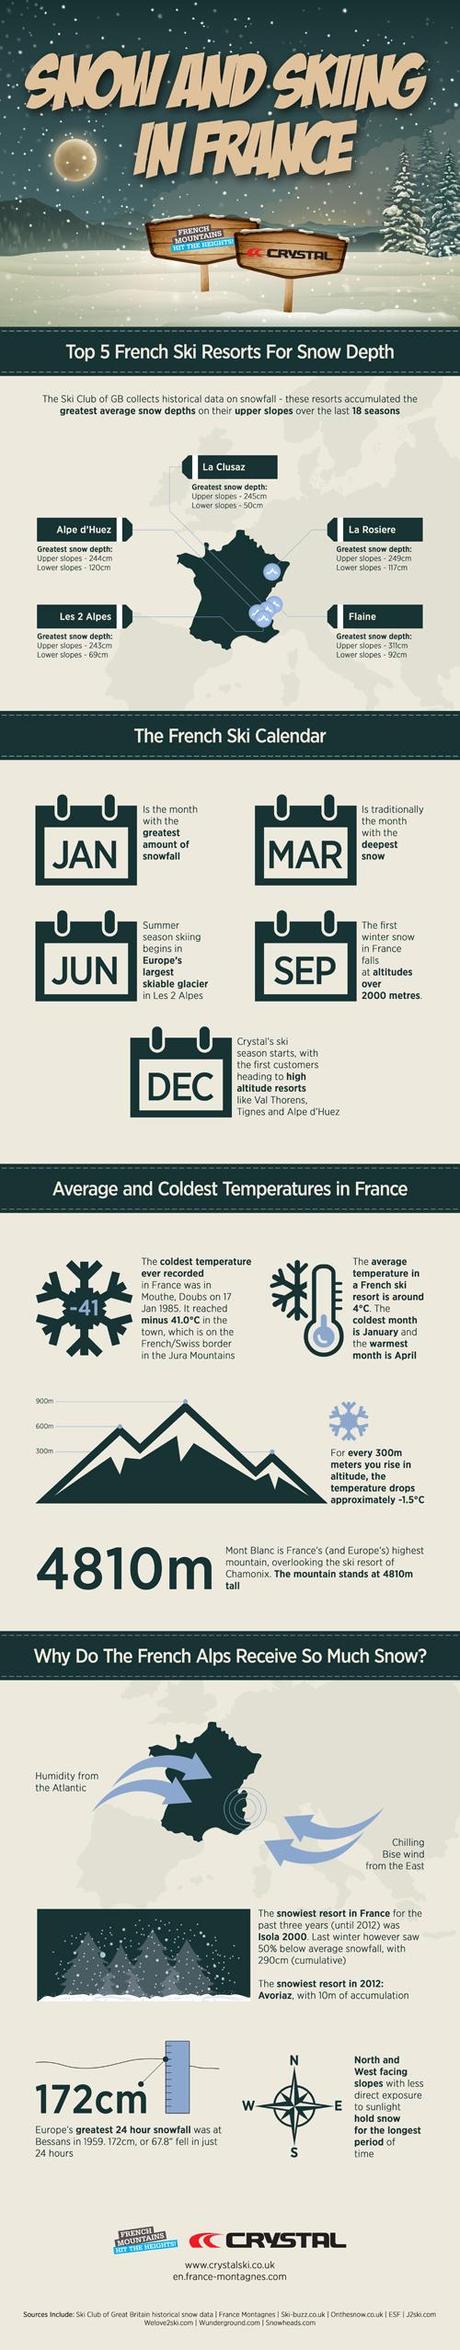 A visual guide to skiing in France